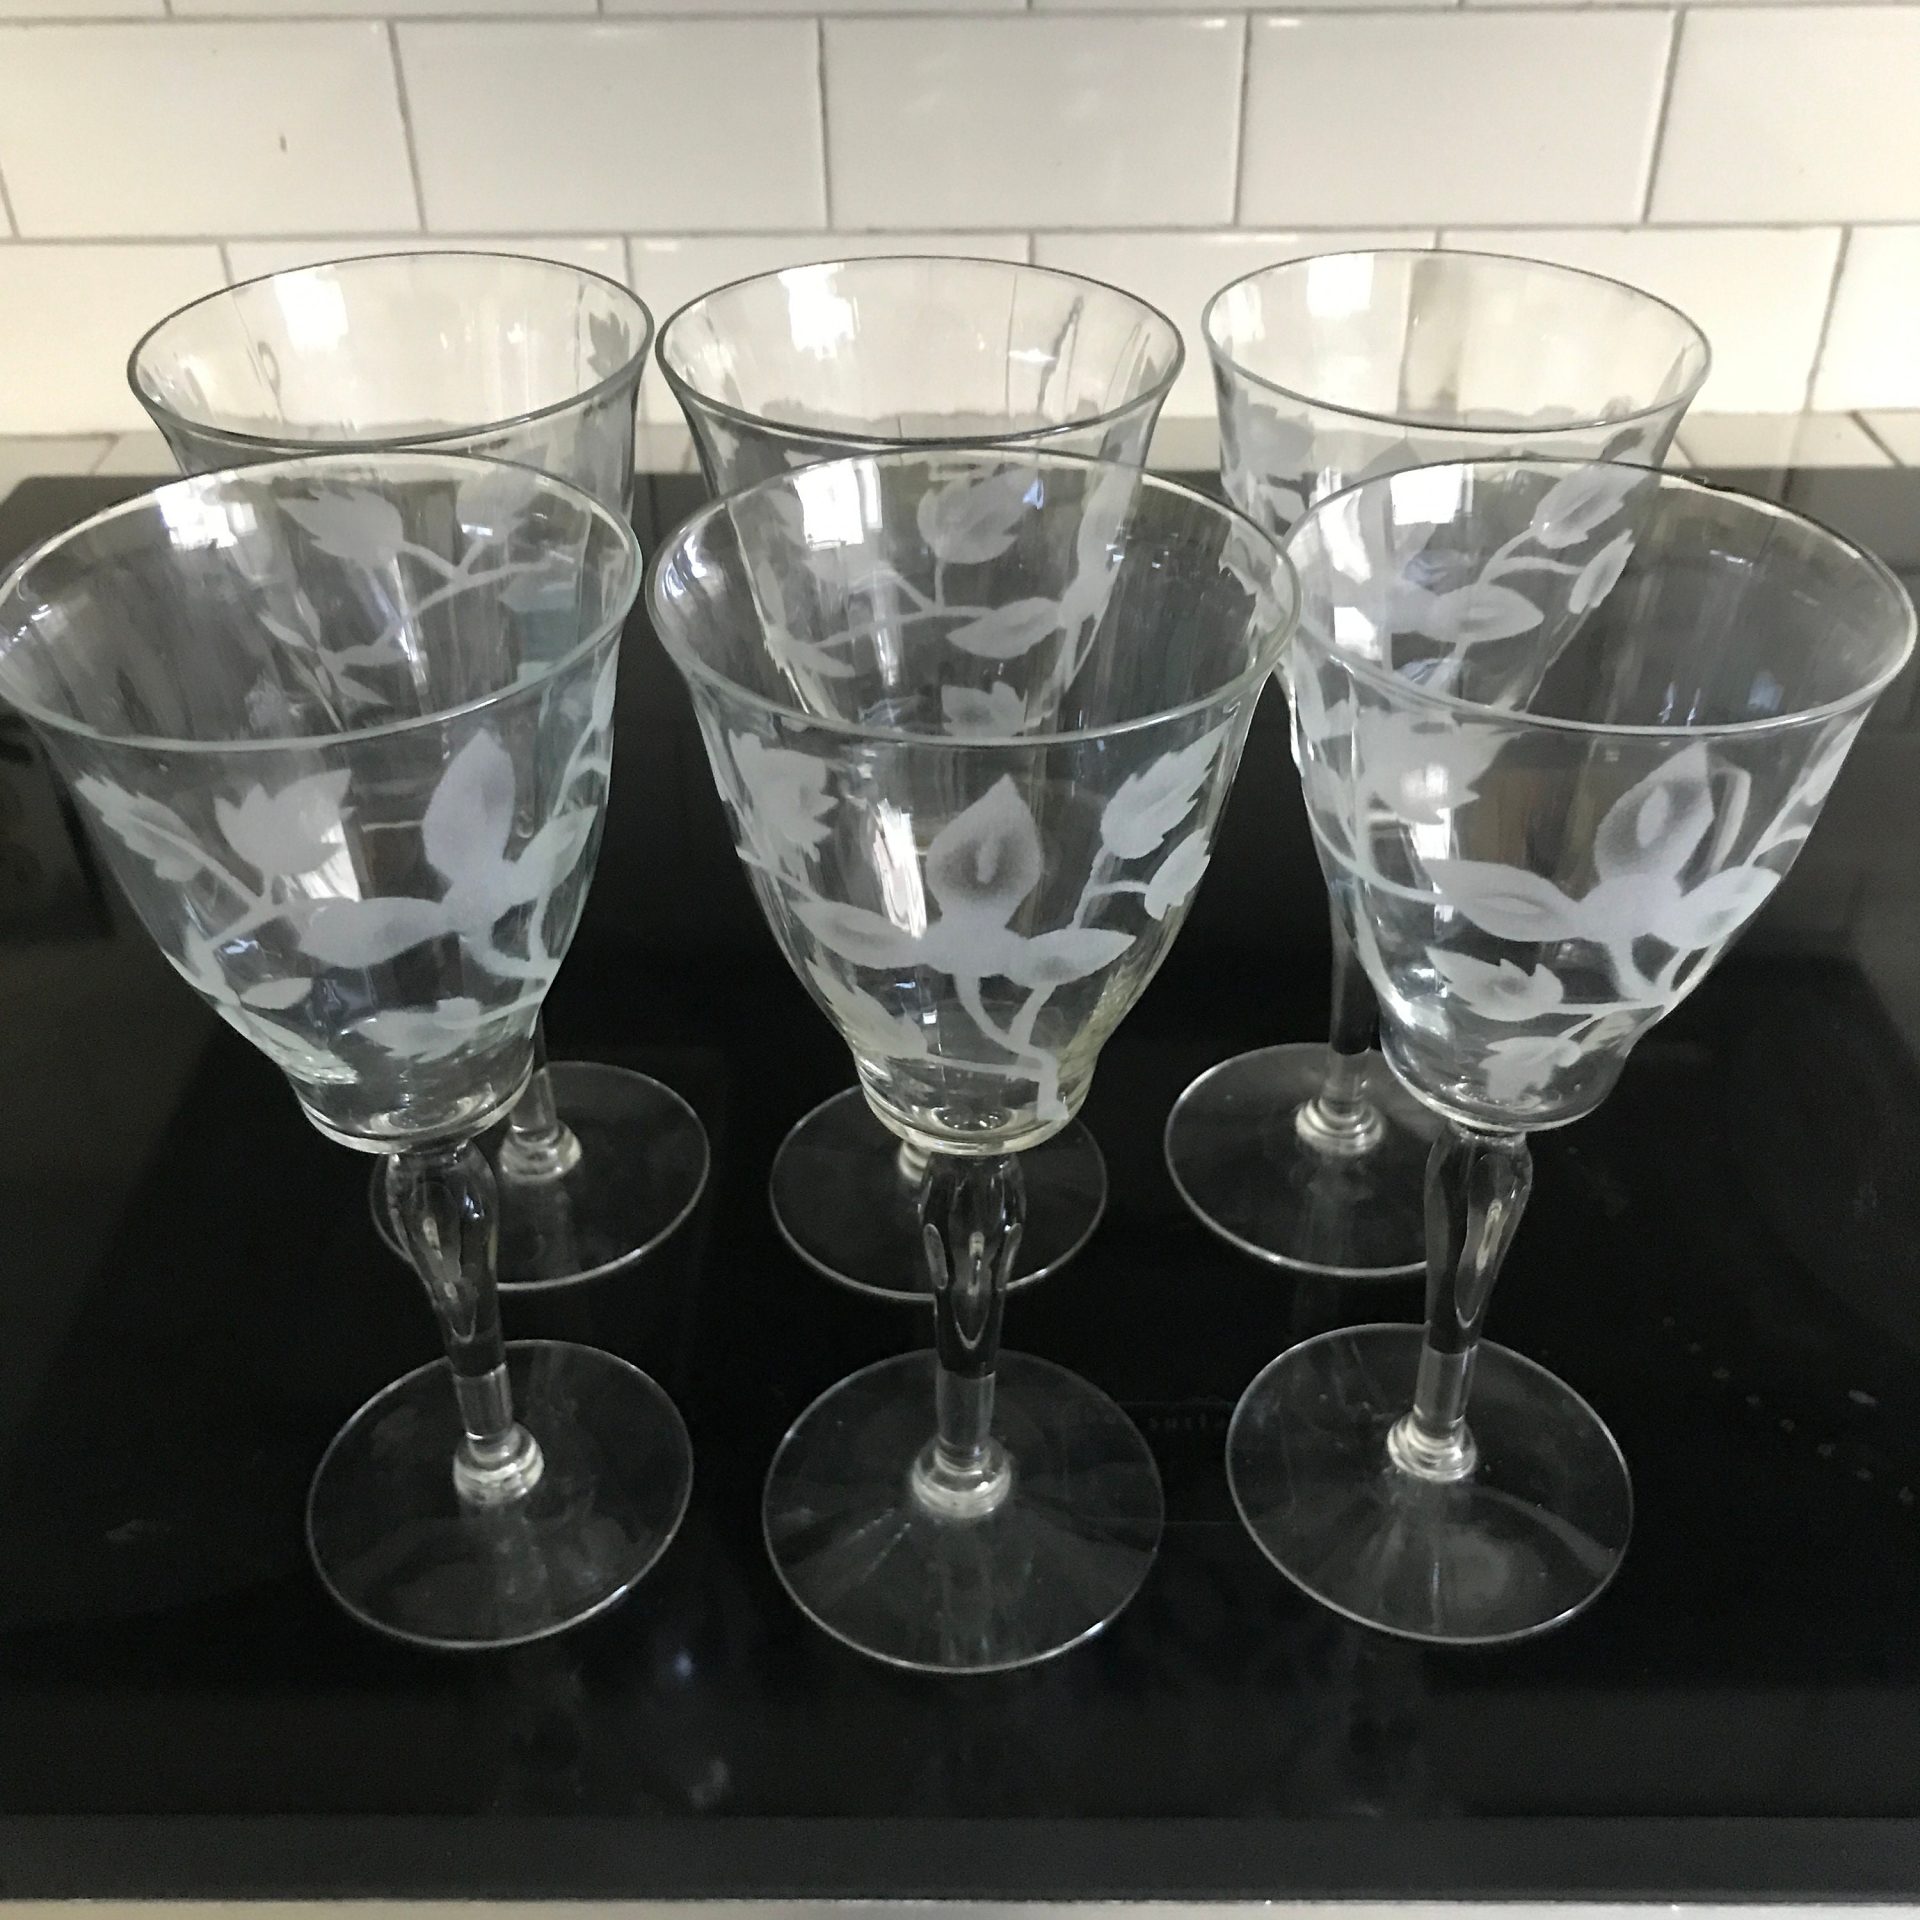 https://www.truevintageantiques.com/wp-content/uploads/2021/11/vintage-set-of-6-crystal-wine-glasses-stemware-barware-collectible-crystal-drinkware-display-floral-etched-pattern-61a295341-scaled.jpg